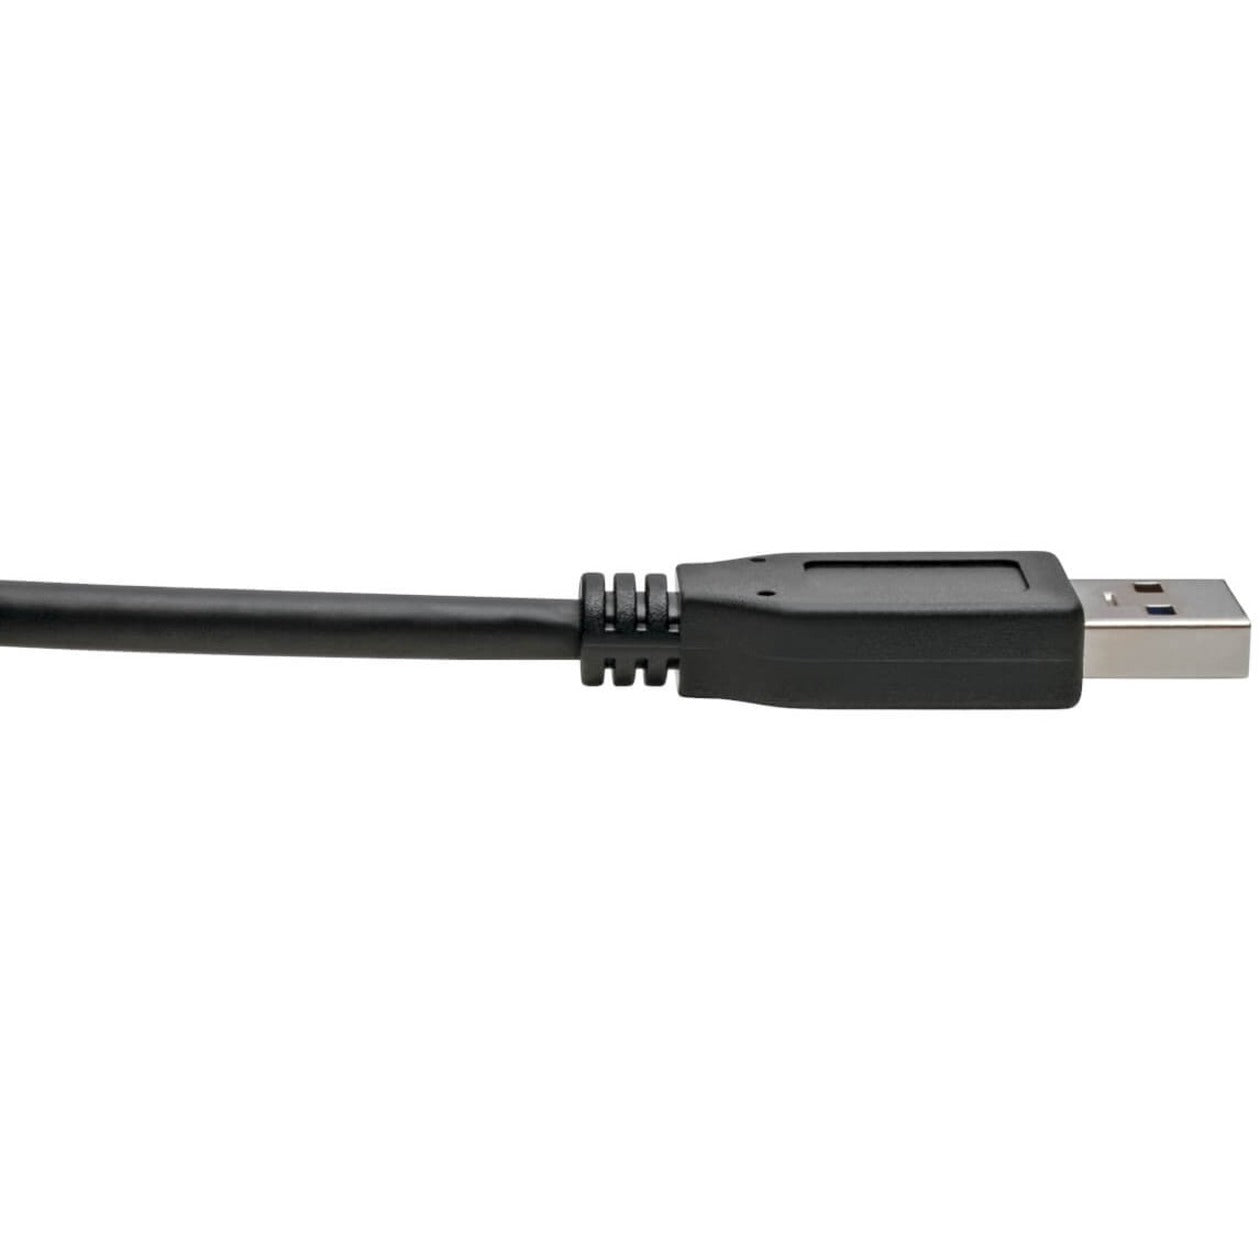 Tripp Lite U428-C03-G2 USB Type-C to USB Type-A Cable, M/M, USB-IF Certified, 3 ft.